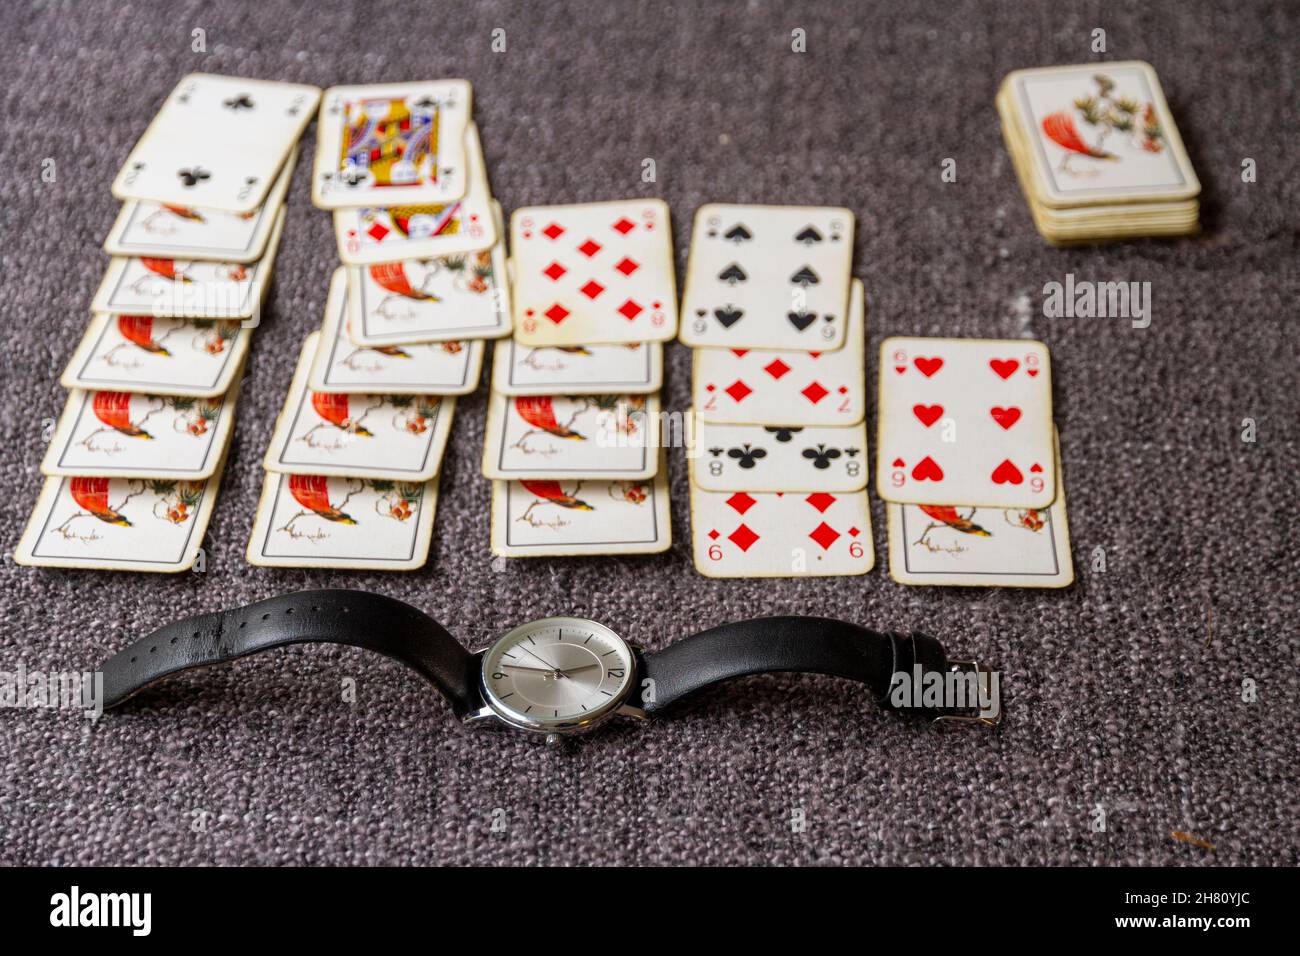 A wrist watch in front of a game of solitaire or pateince implying killing time, wasting time etc. Stock Photo